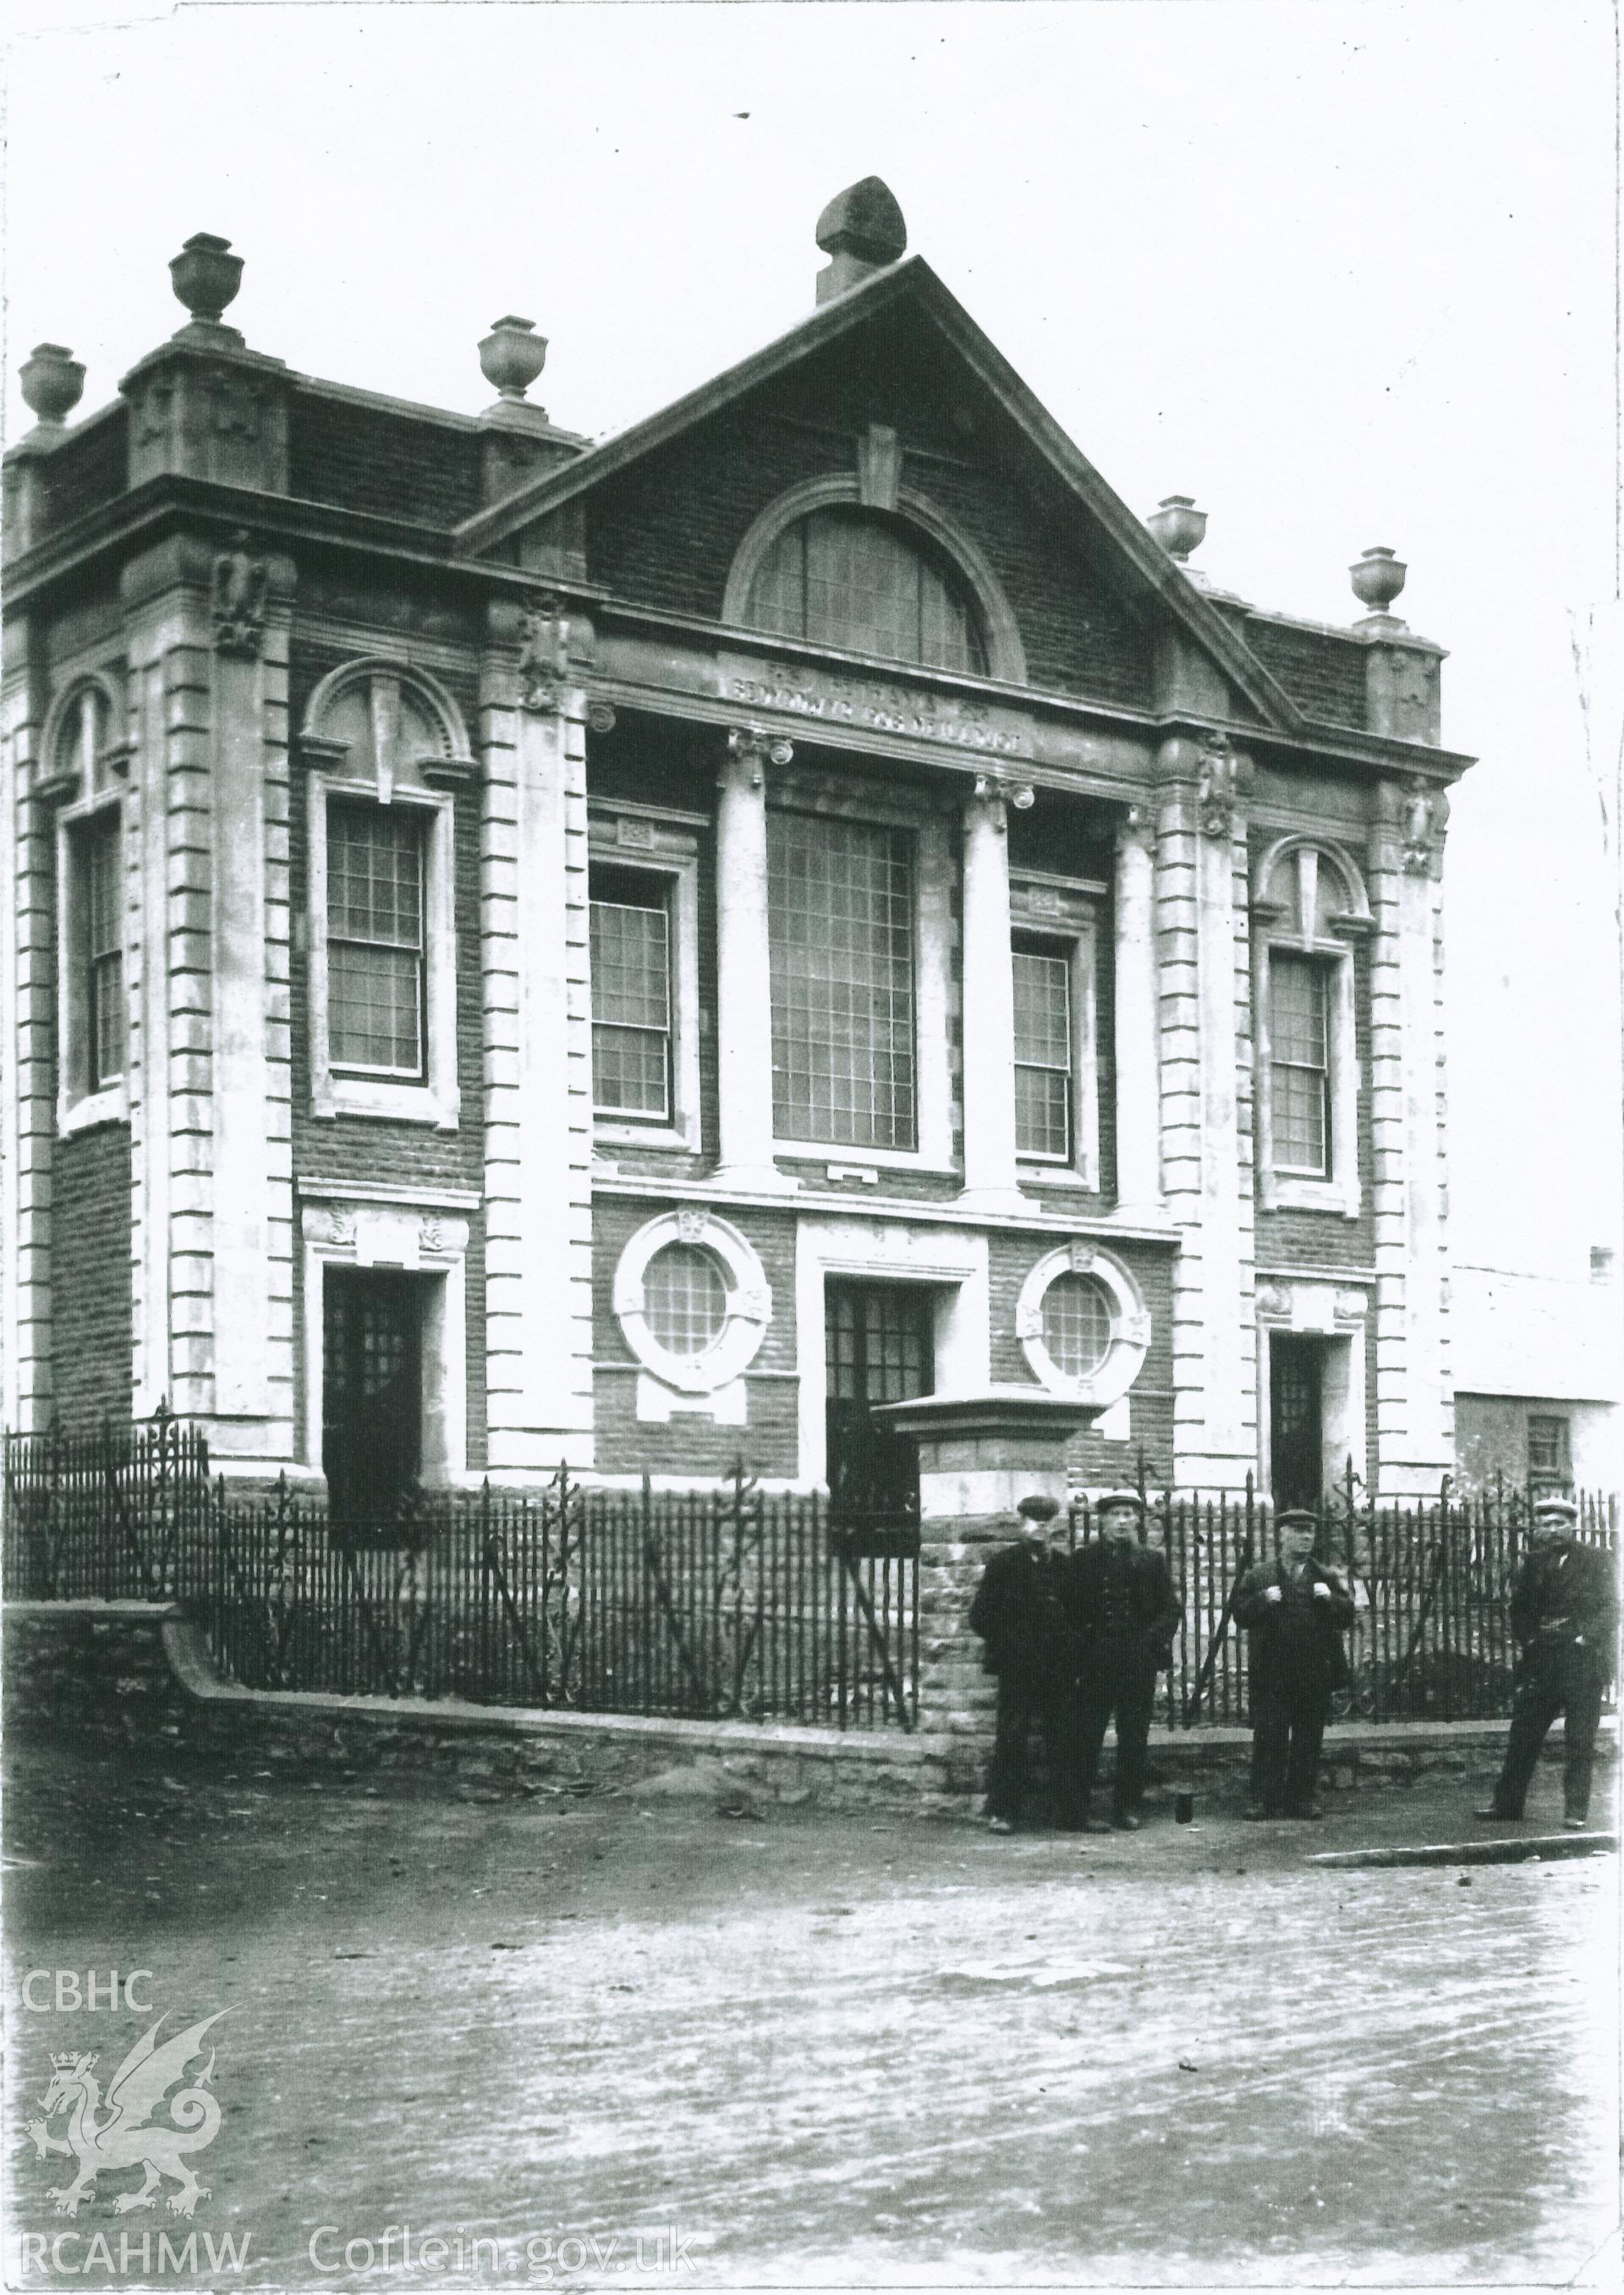 Black and white photograph of Bethania Chapel's front facade, circa 1904. Donated to the RCAHMW by Cyril Philips as part of the Digital Dissent Project.